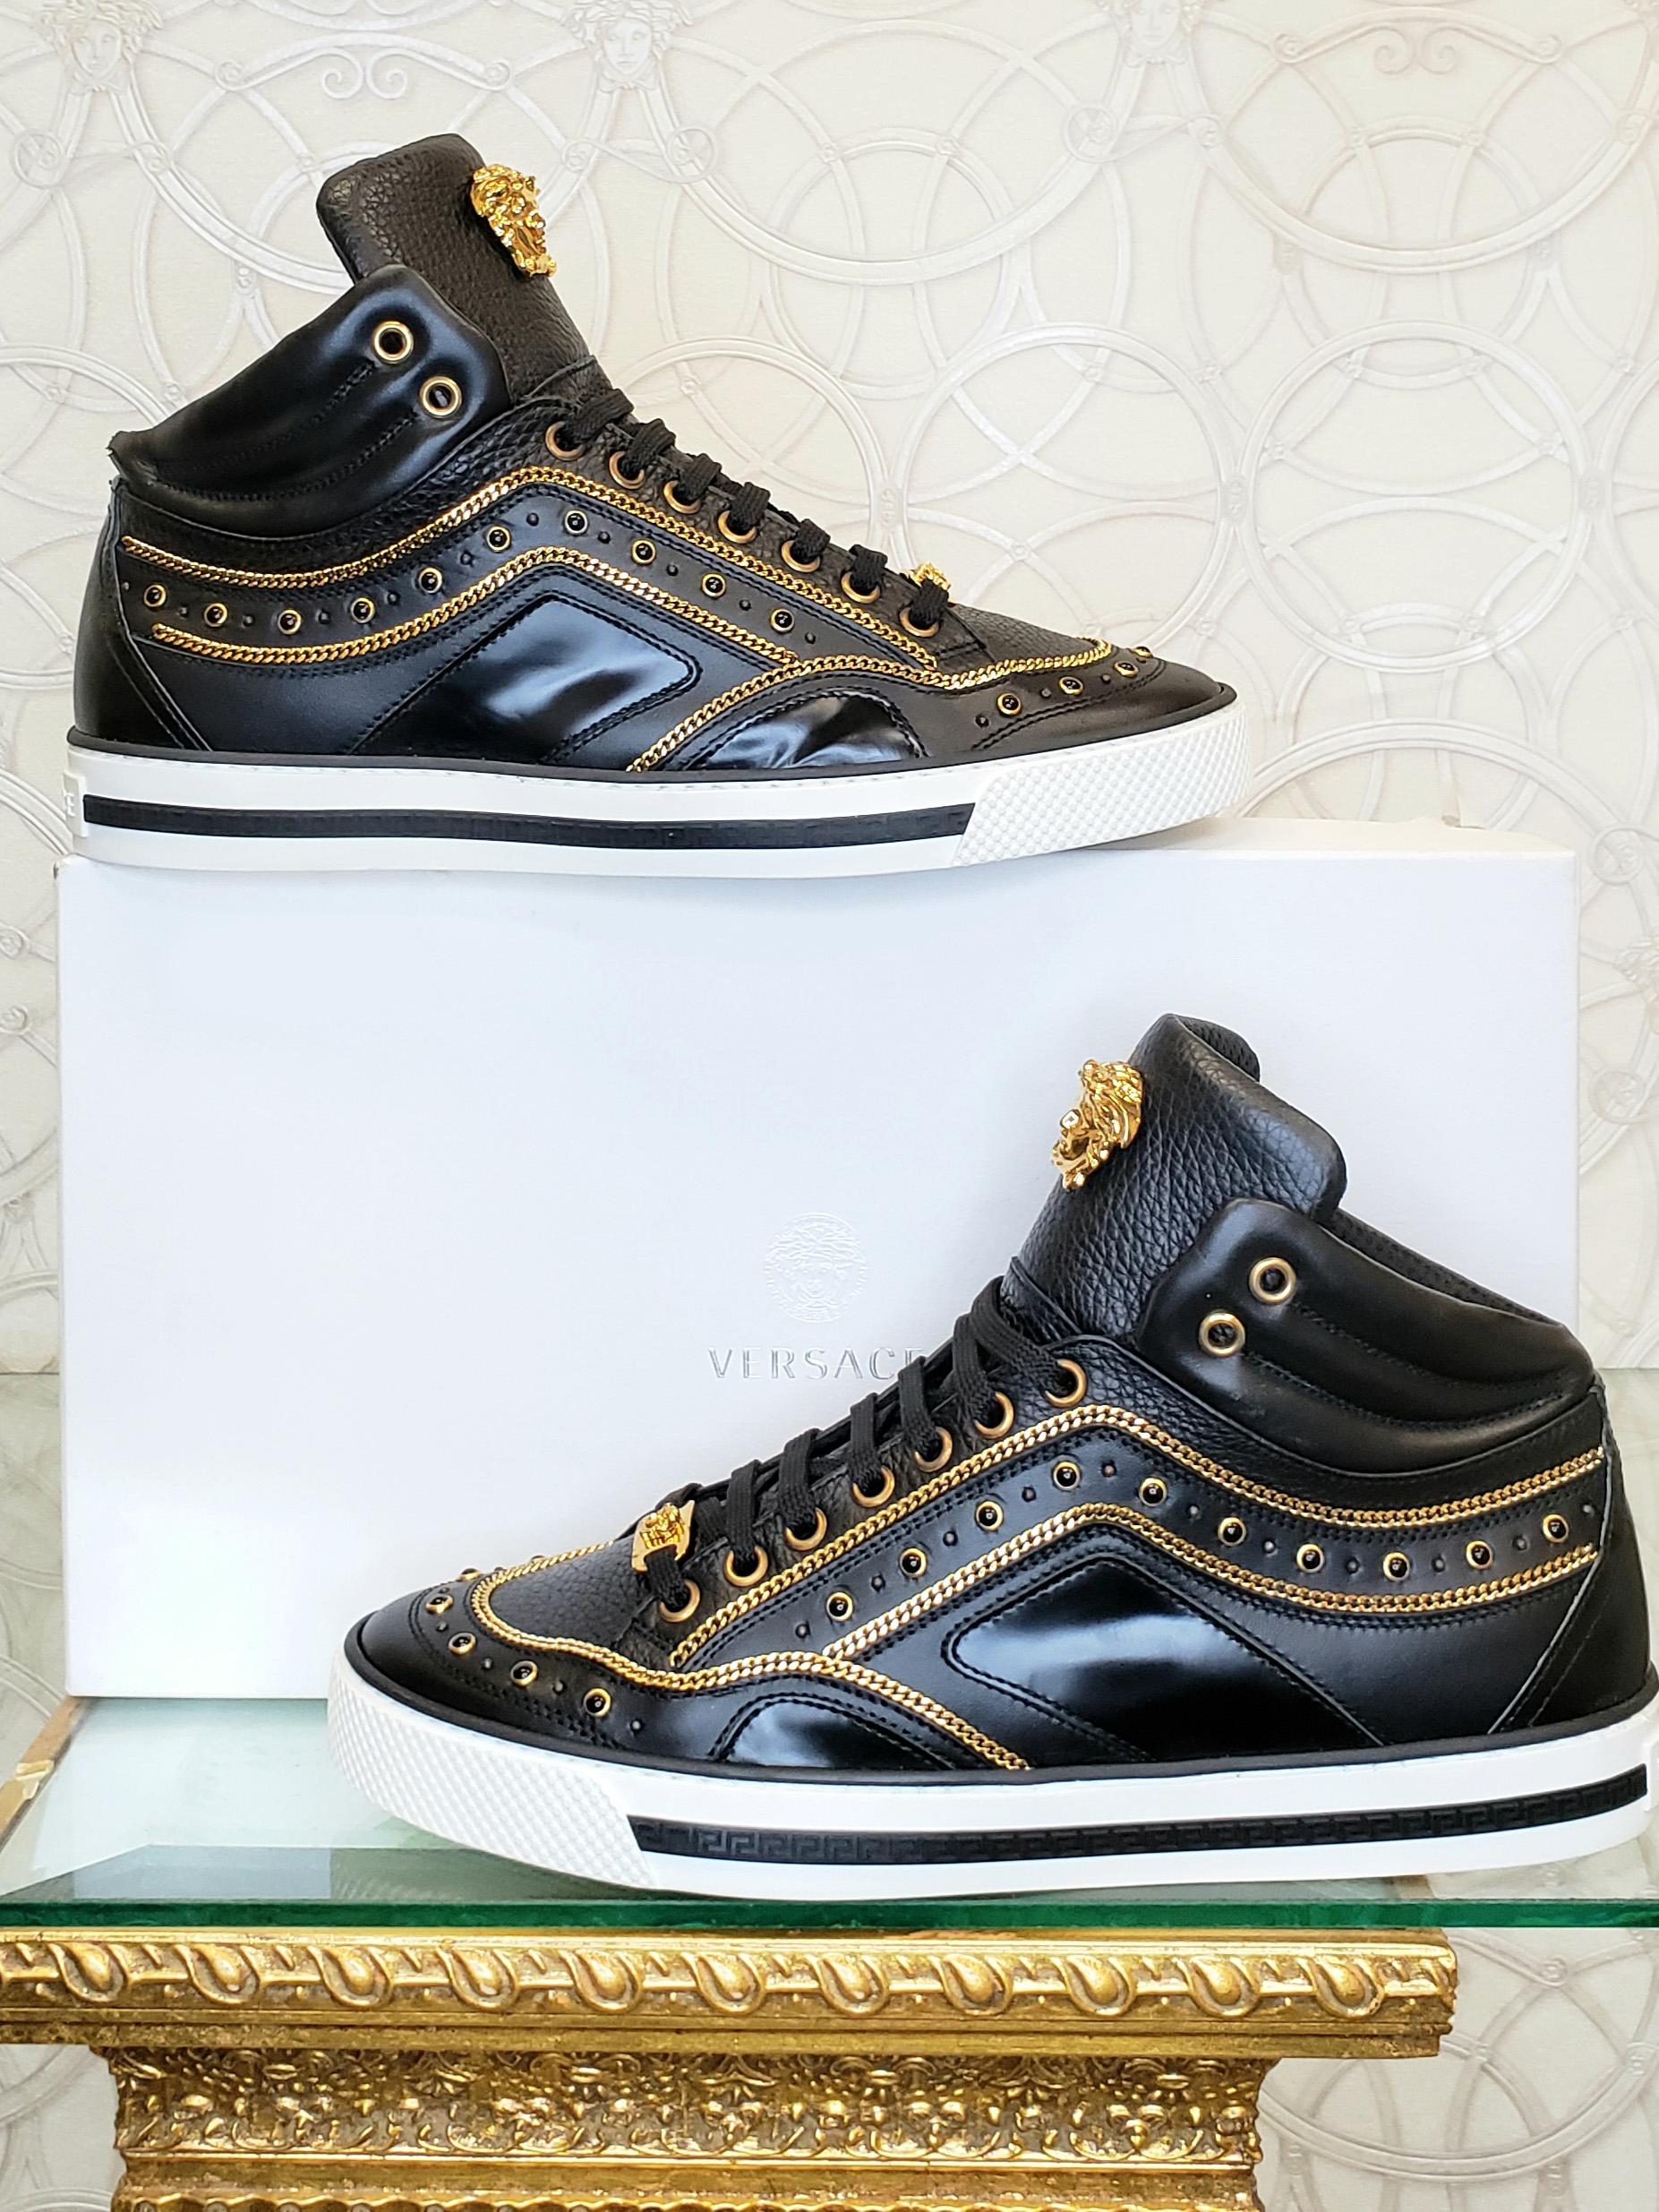 Black NEW VERSACE STUDDED HIGH-TOP SNEAKERS with GOLD 3D MEDUSA BUCKLE SIZE 43 - 10